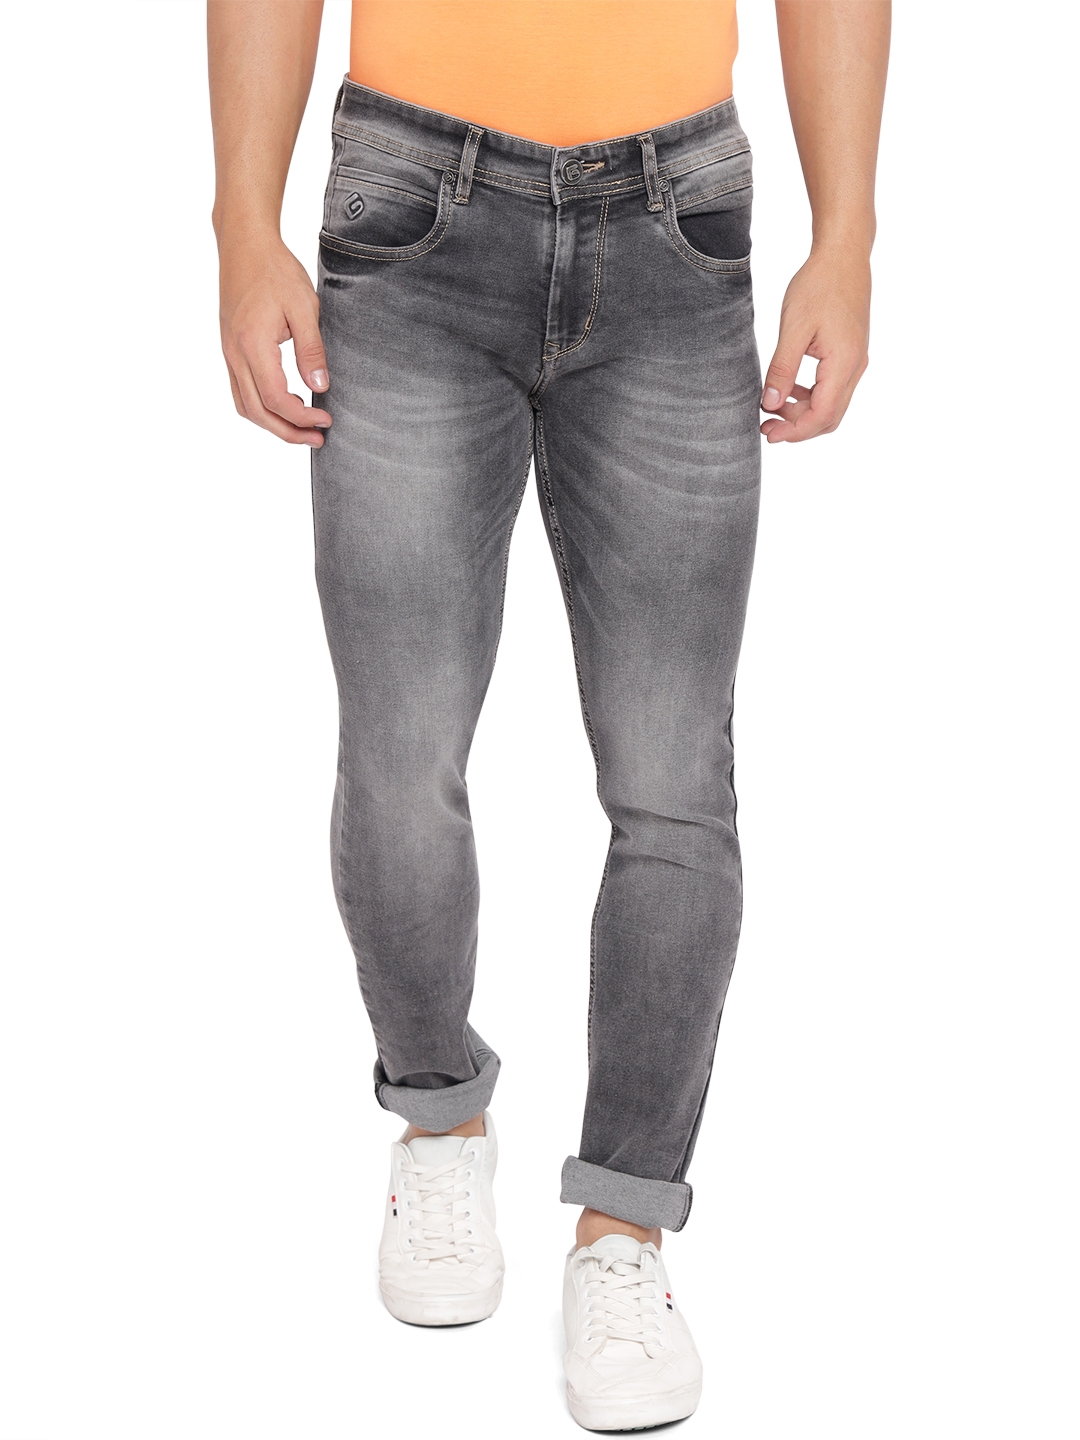 Greenfibre | Forest Grey Solid Narrow Fit Jeans | Greenfibre 0